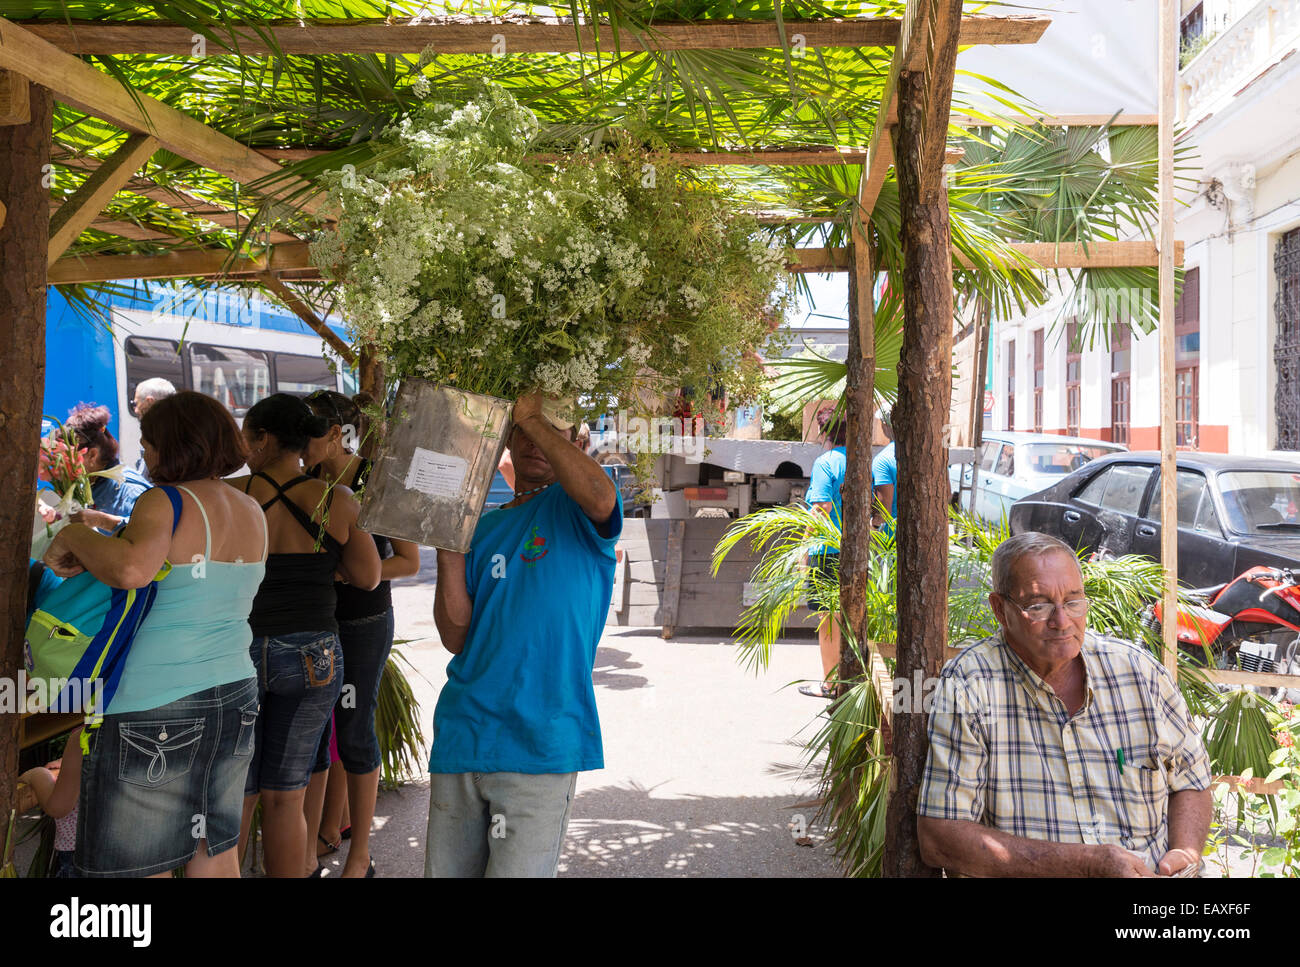 MATANZAS, CUBA - MAY 10, 2014: Lively street market of flowers and plants the day before Mother's Day. Mother's Day is celebrate Stock Photo